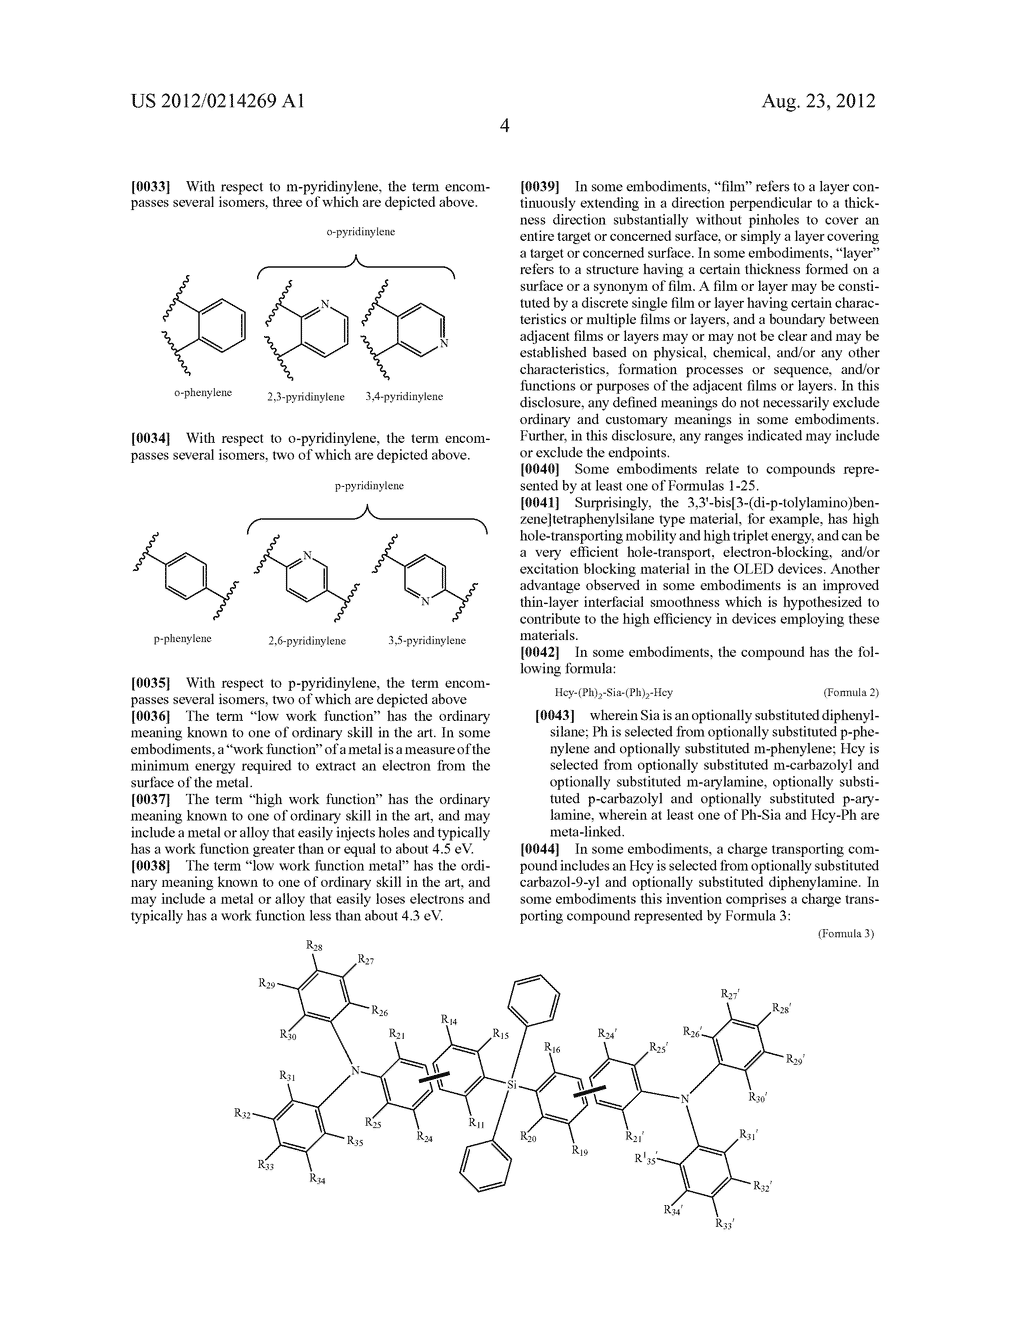 TETRAPHENYLSILANE COMPOUNDS SUITABLE AS ORGANIC HOLE-TRANSPORT MATERIALS - diagram, schematic, and image 10